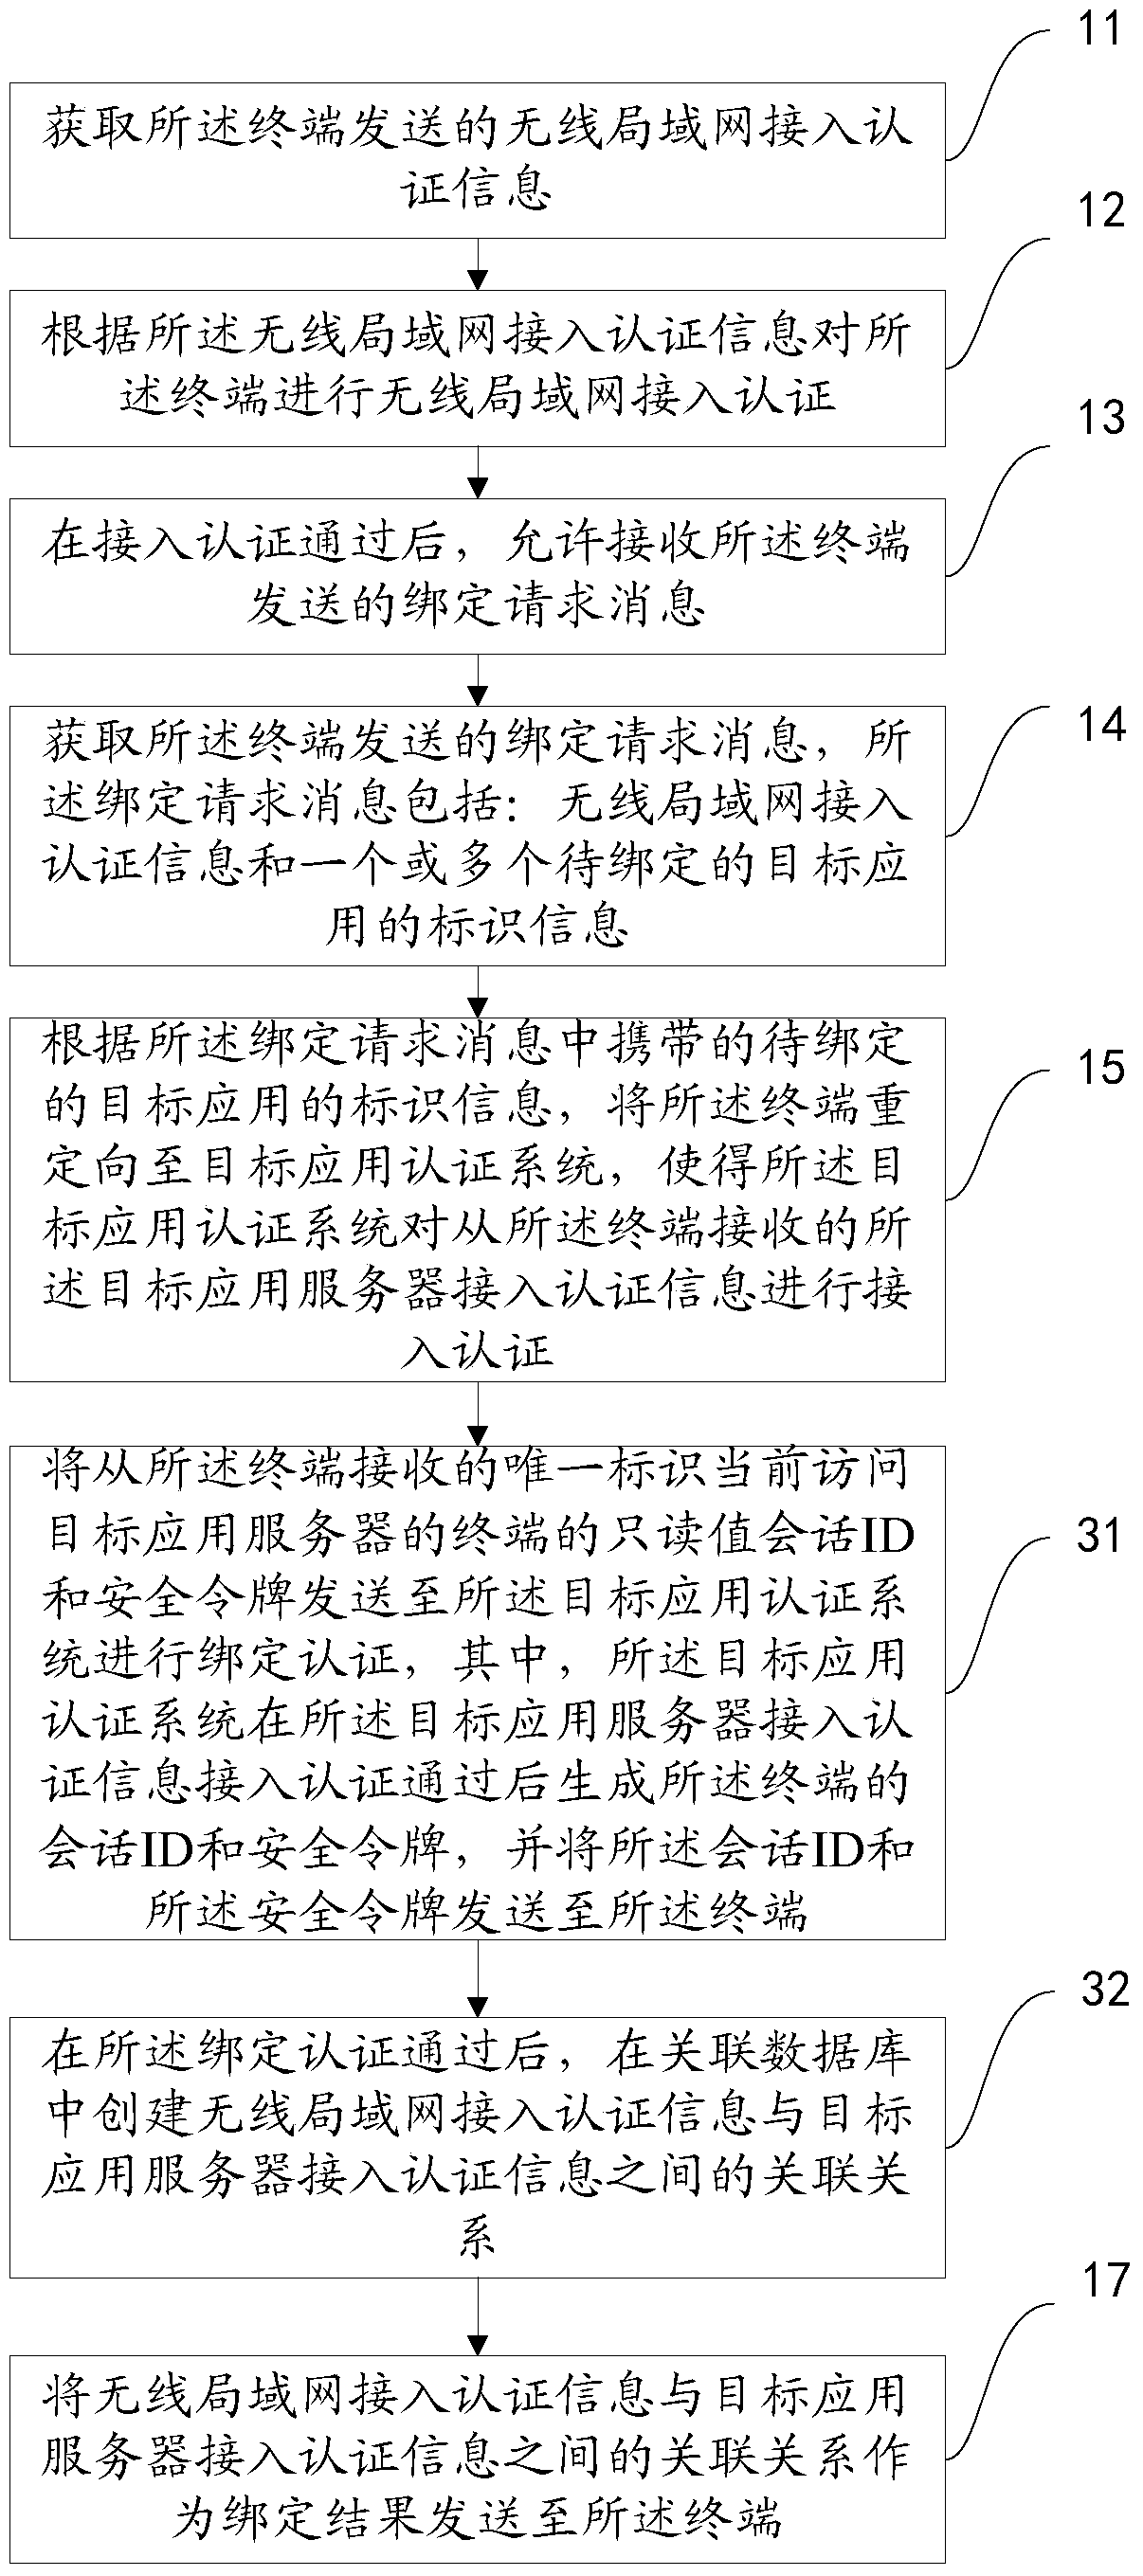 An access authentication method and access authentication system